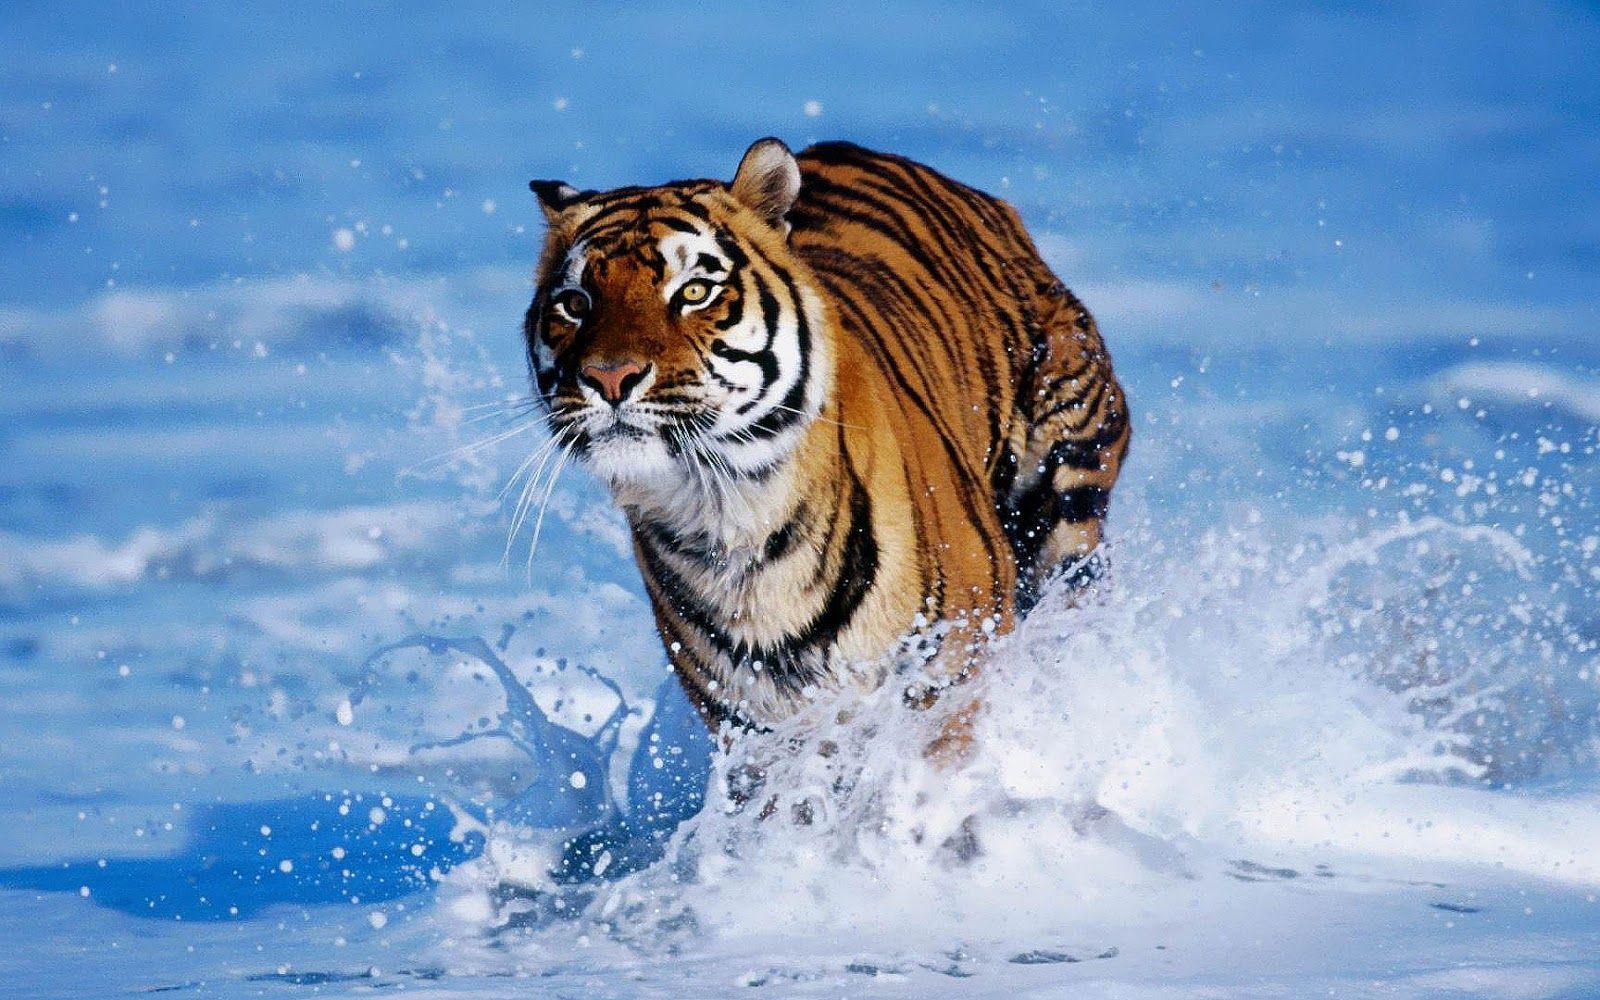 HD Tigers Wallpapers and Photos | HD Animals Wallpapers